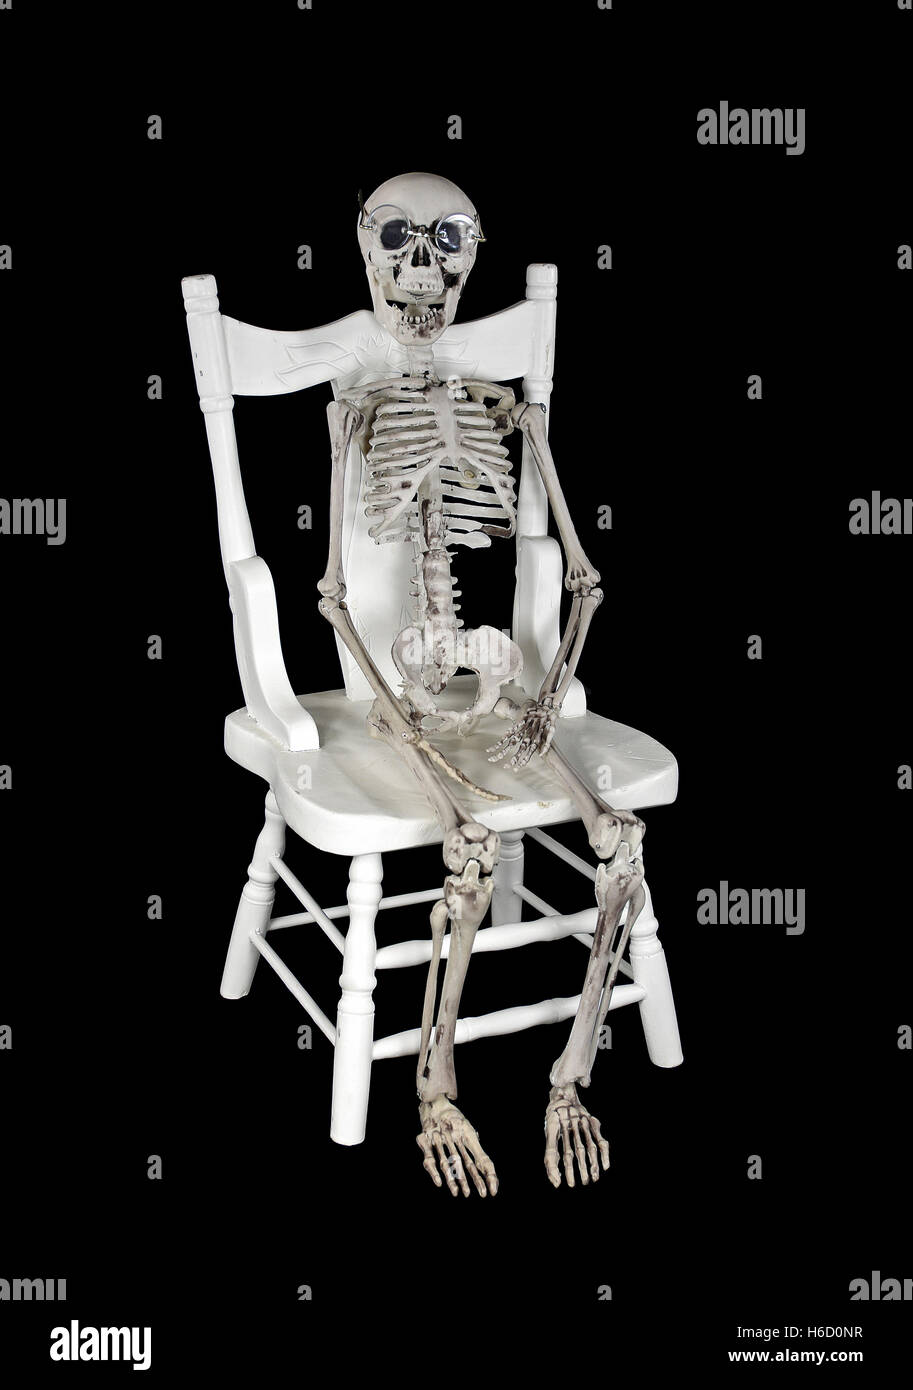 skeleton wearing glasses sitting on white wooden chair isolated on black Stock Photo